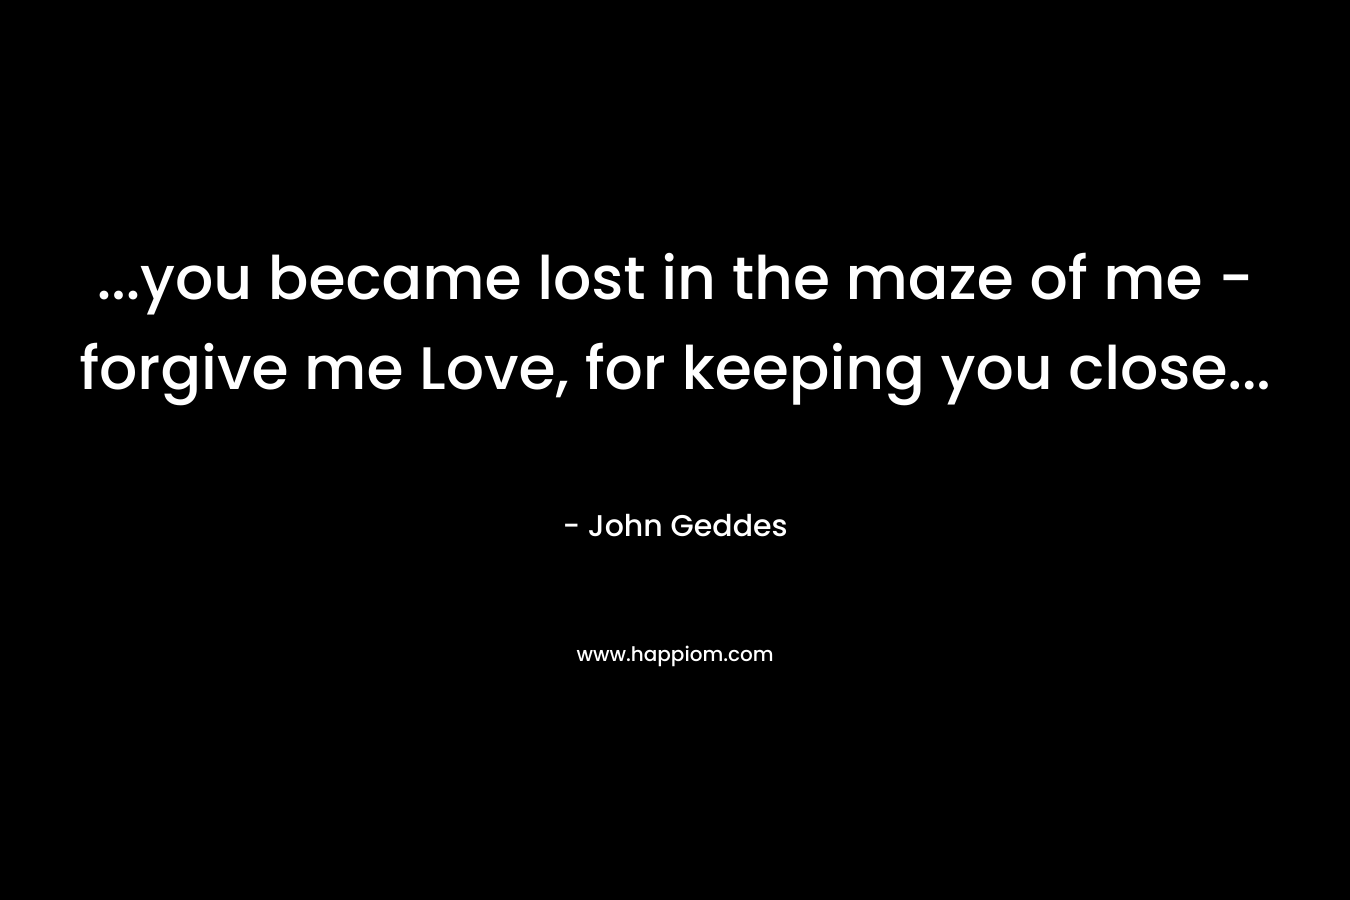 ...you became lost in the maze of me - forgive me Love, for keeping you close...